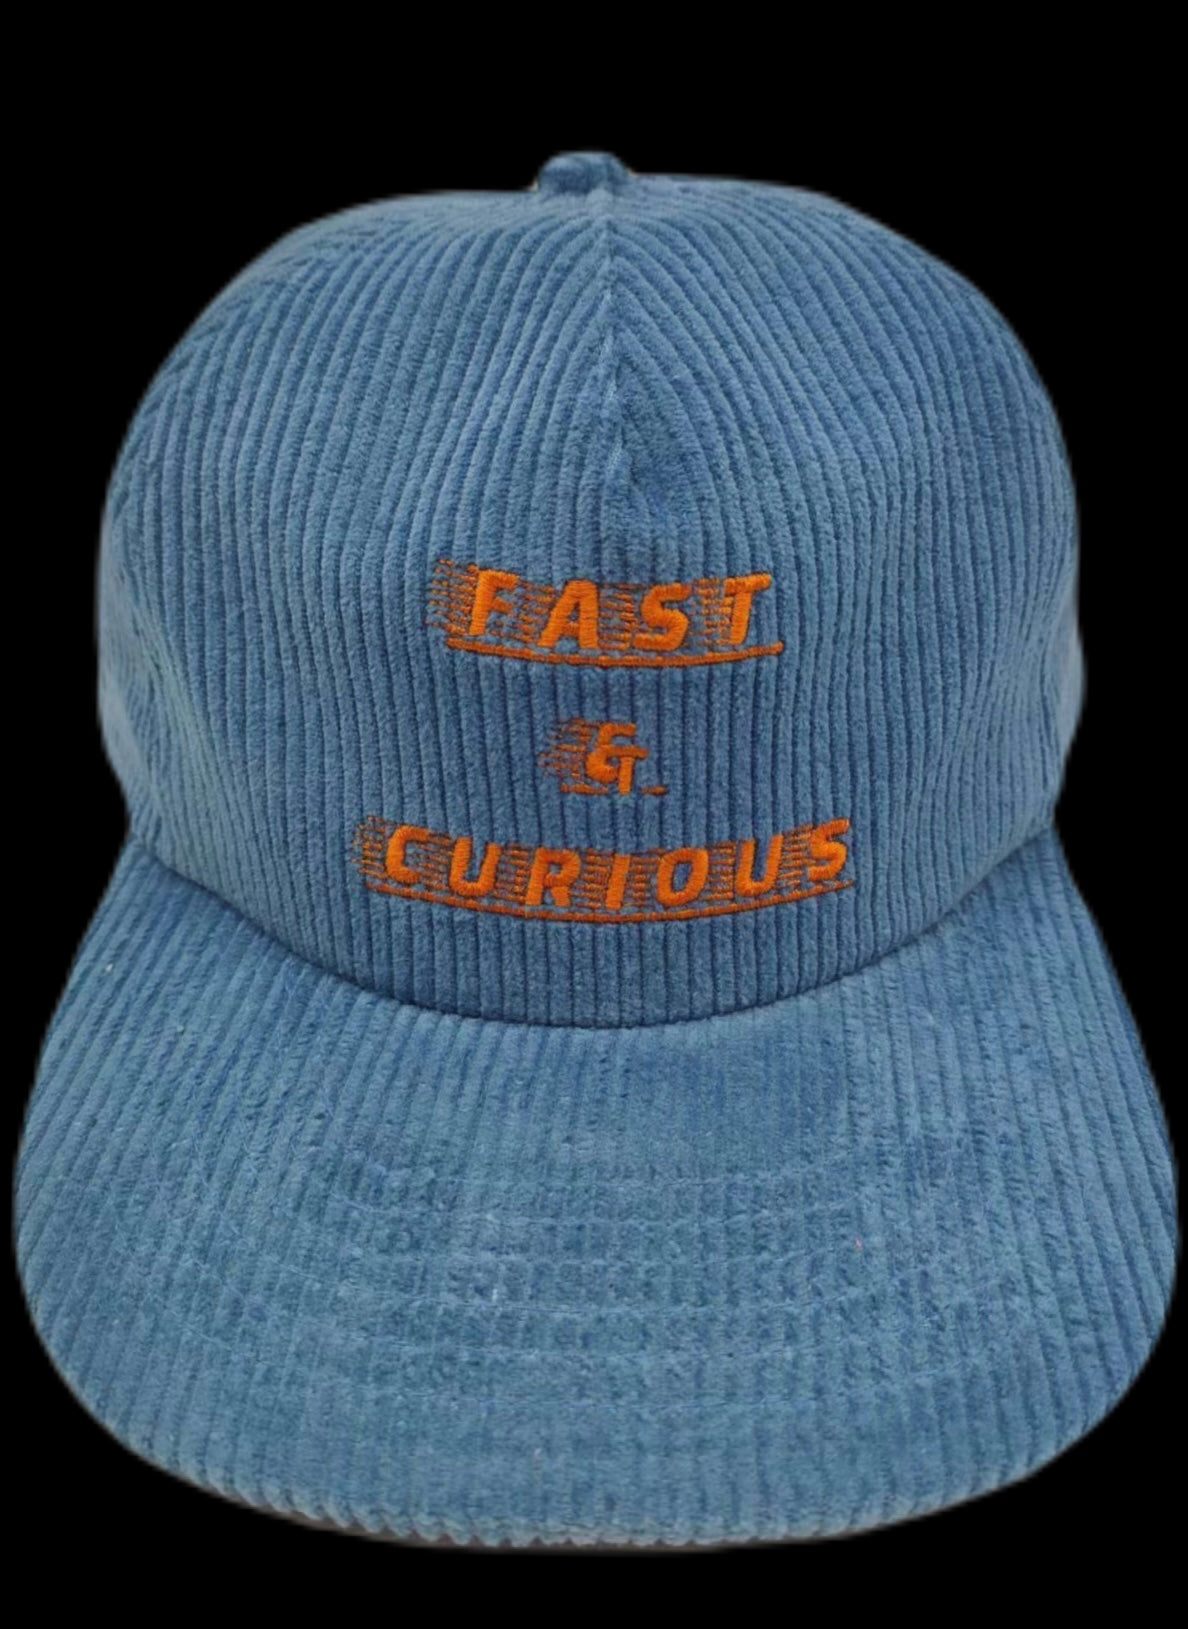 The Fast & Curious Corduroy Hat!